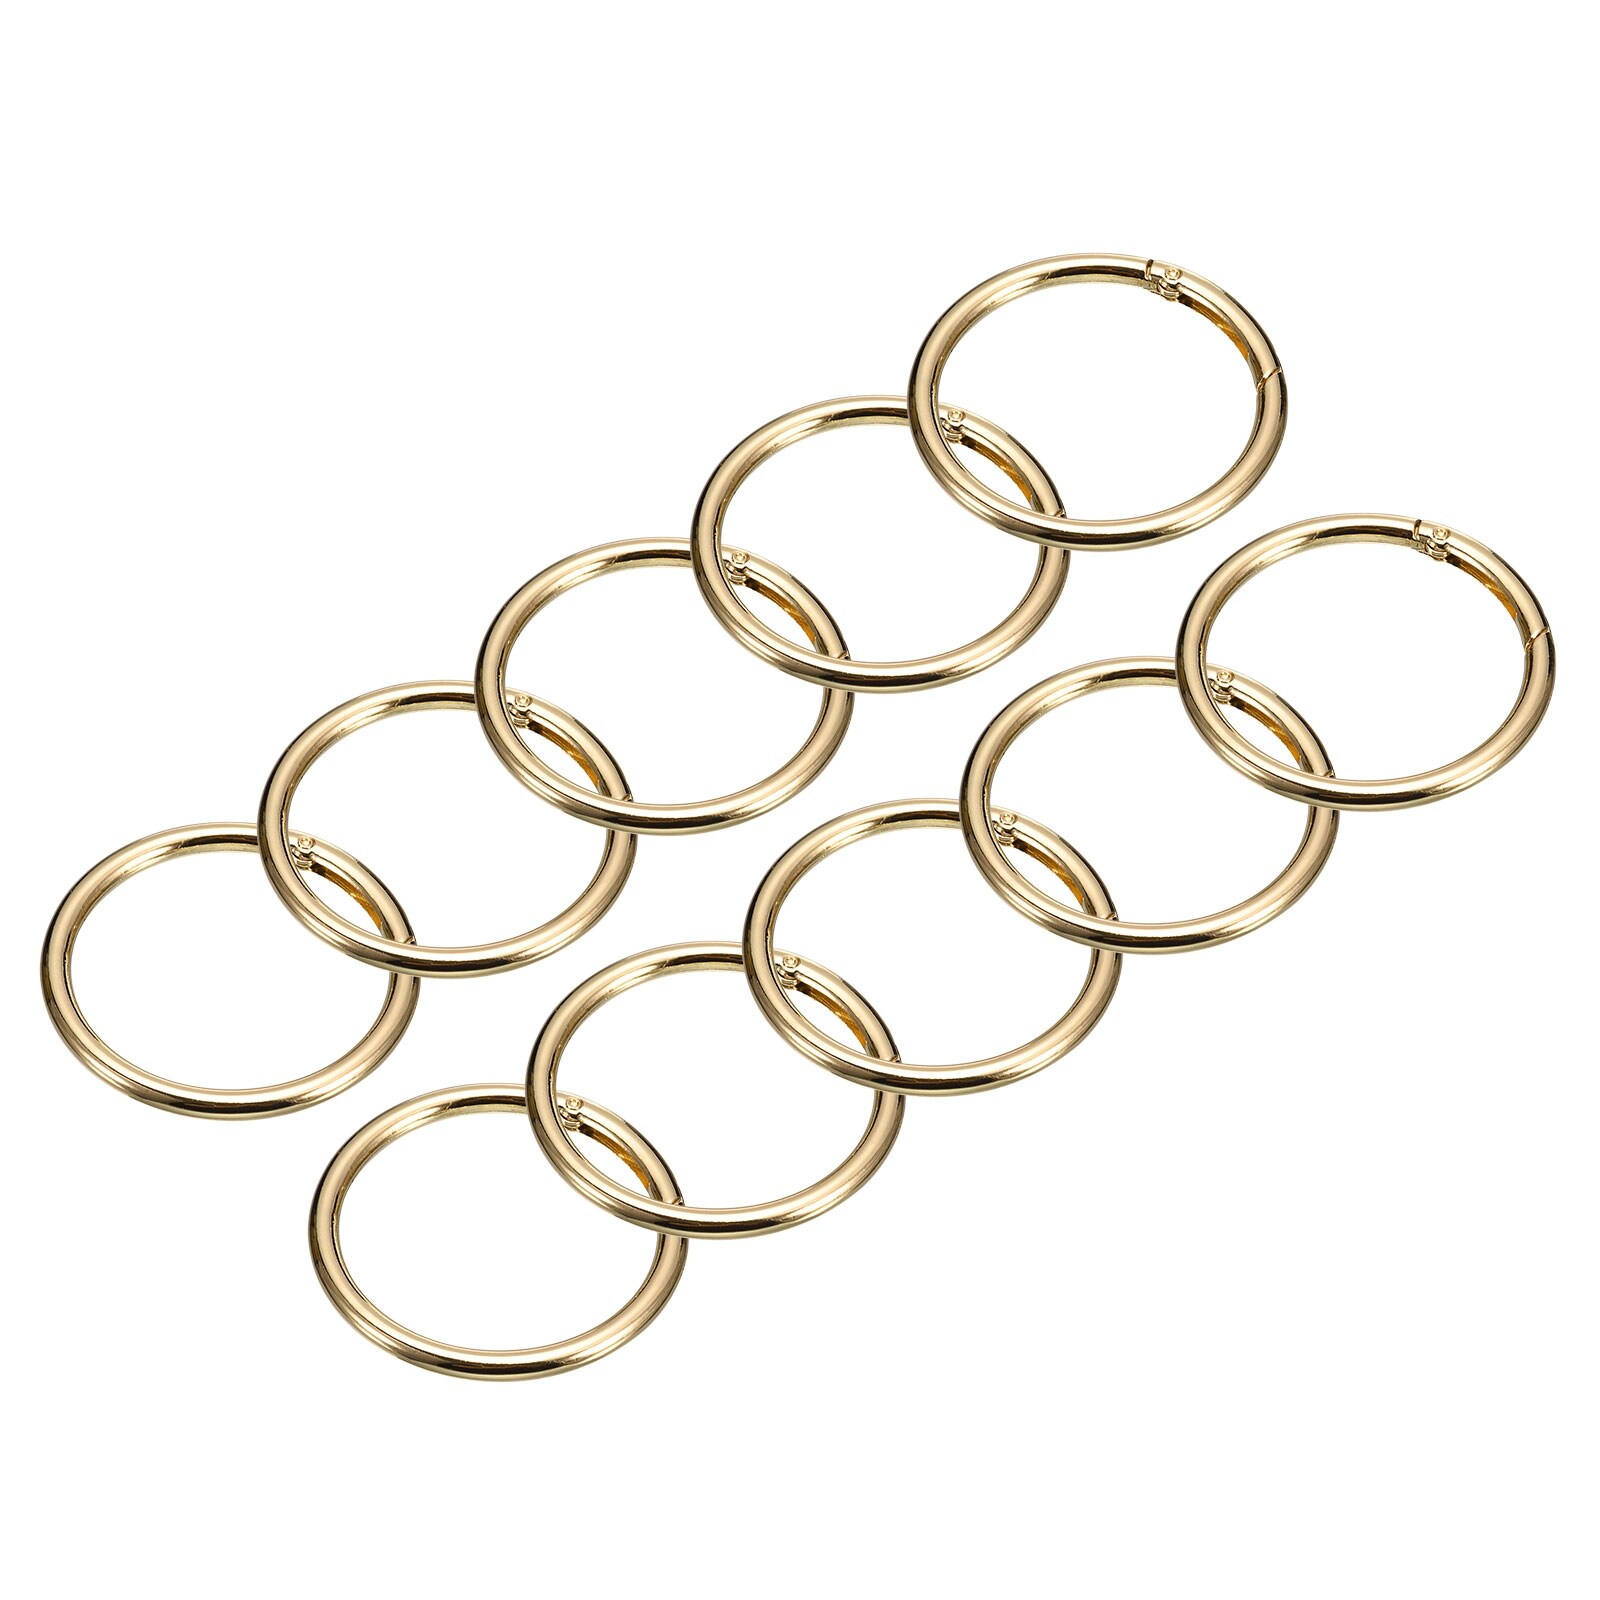  Solid Stainless Steel Metal O-Ring/O Ring - Size XL - 5 Pack :  Arts, Crafts & Sewing